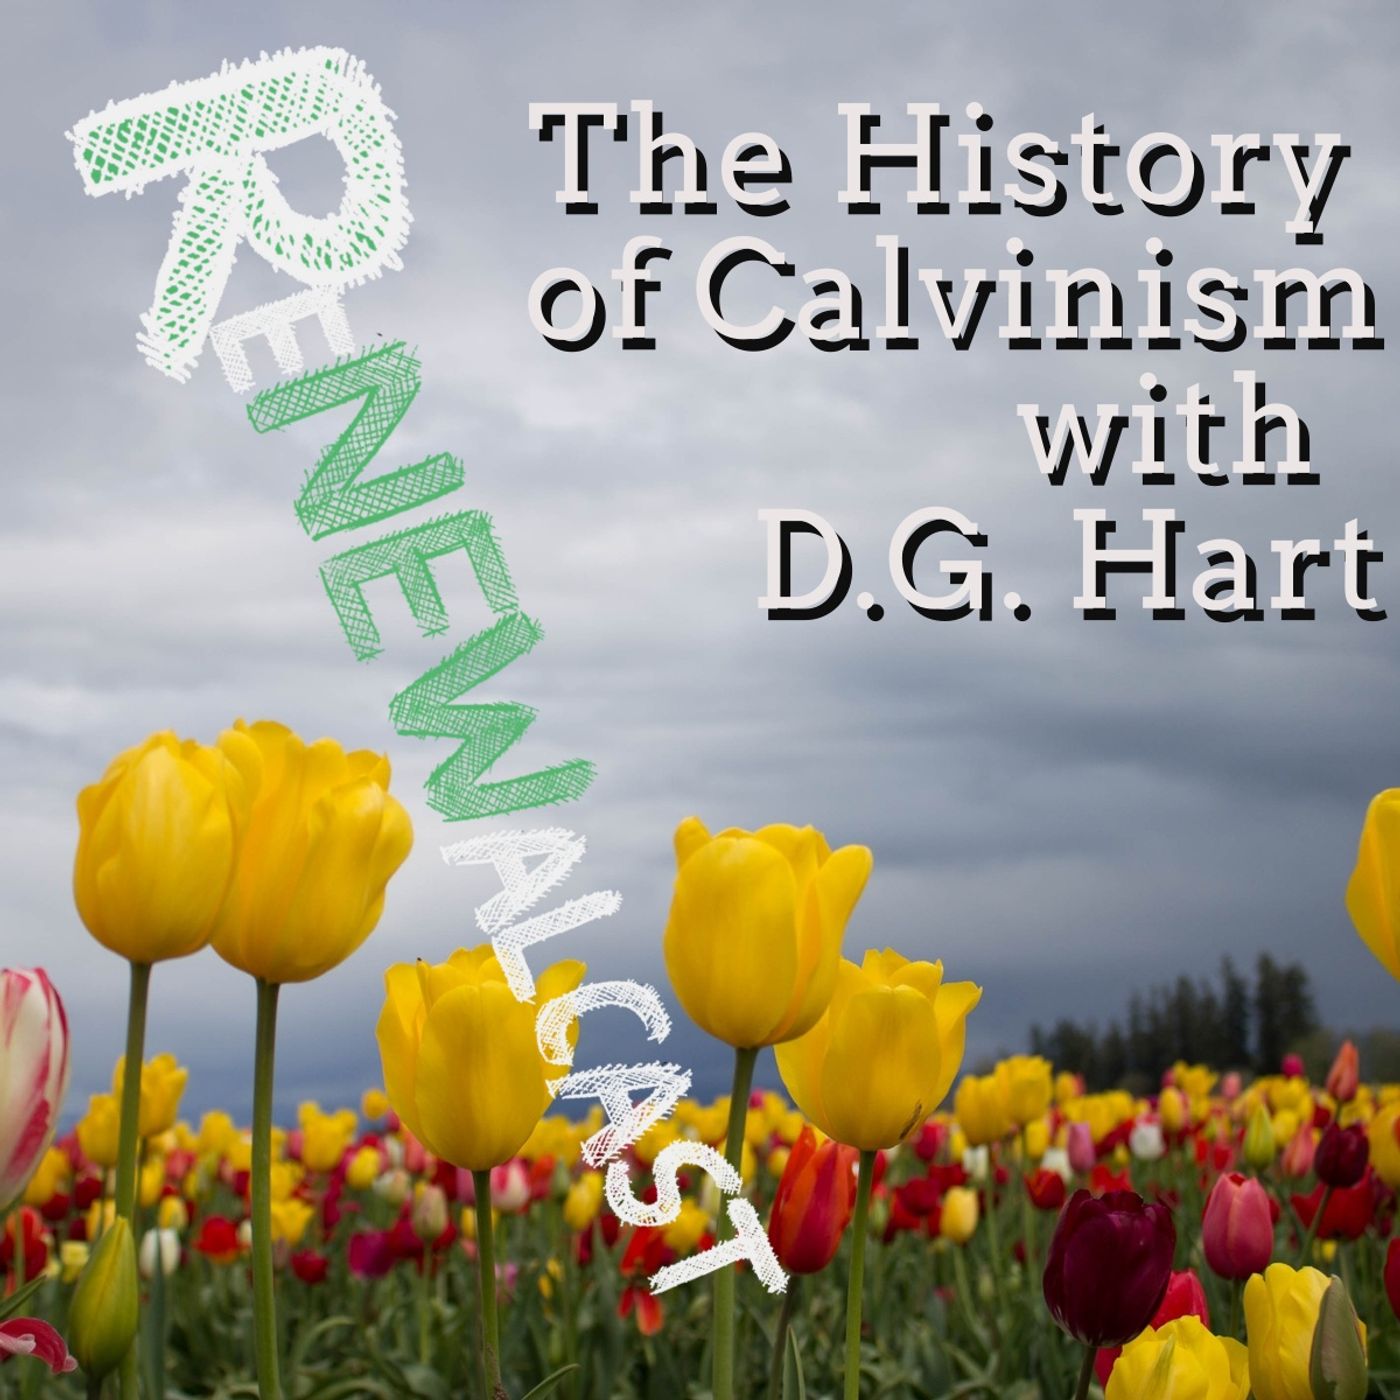 The History of Calvinism with D.G. Hart